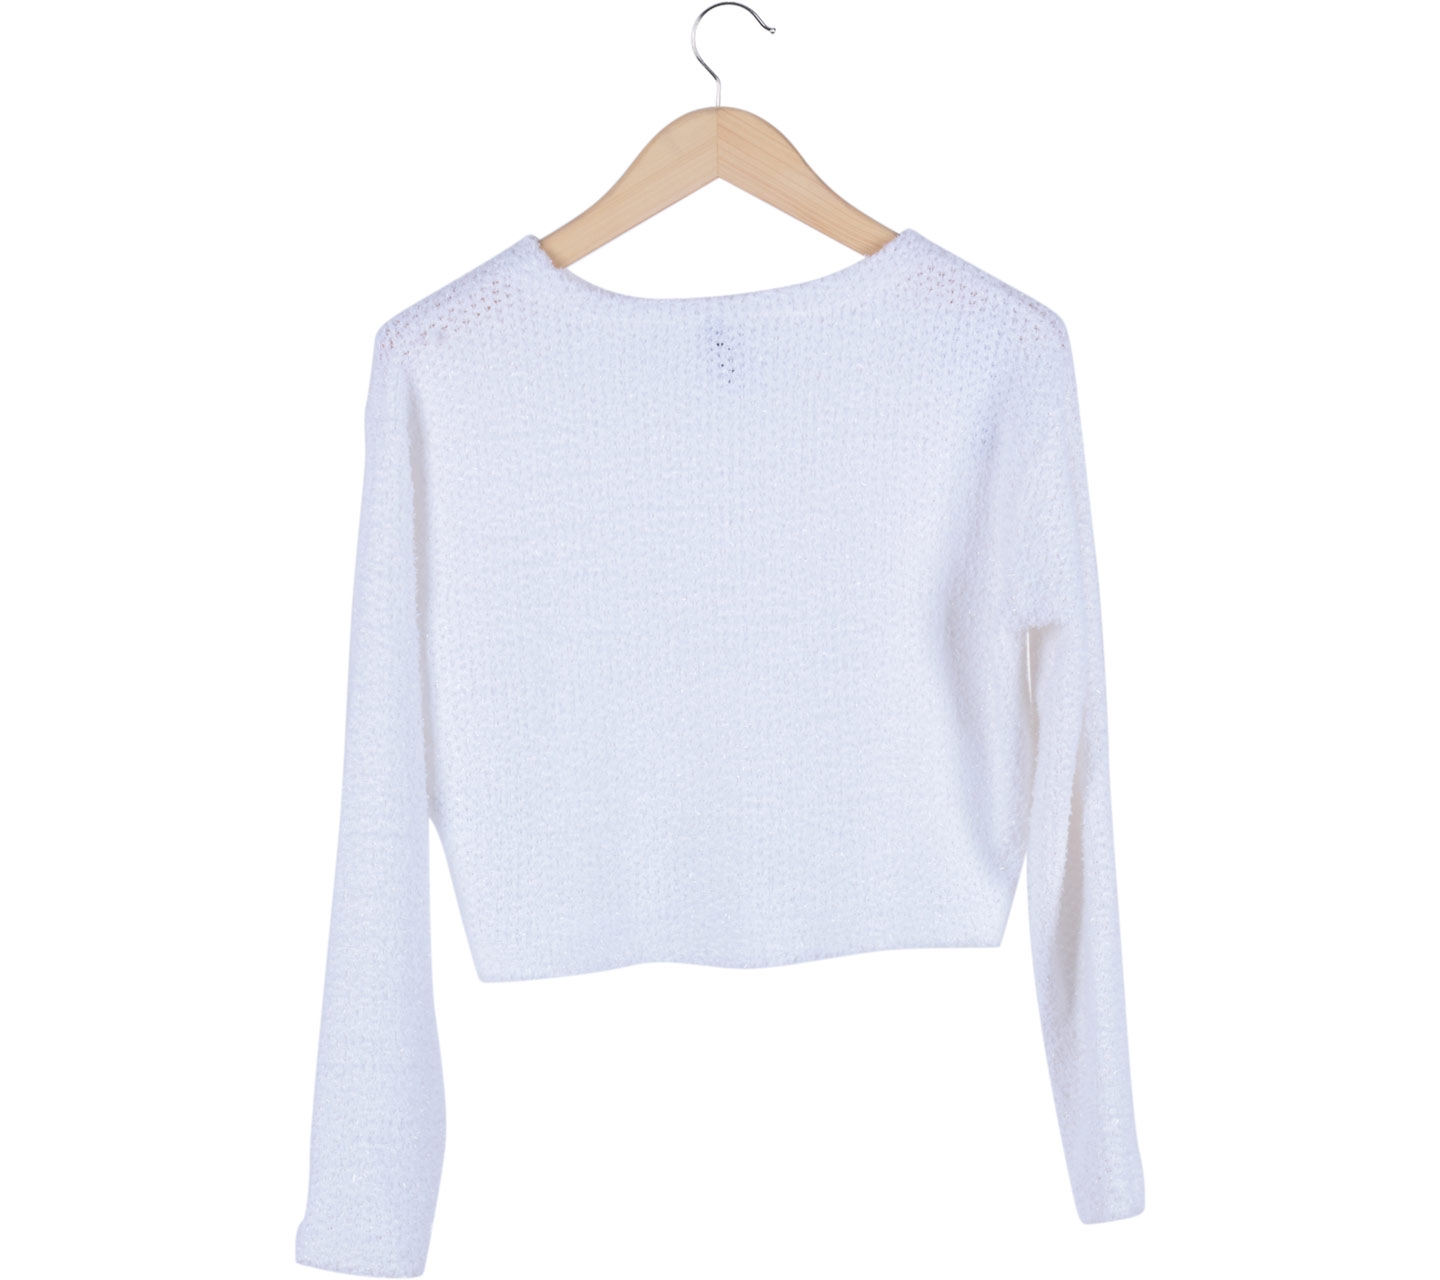 H&M White cropped sweater Sweater